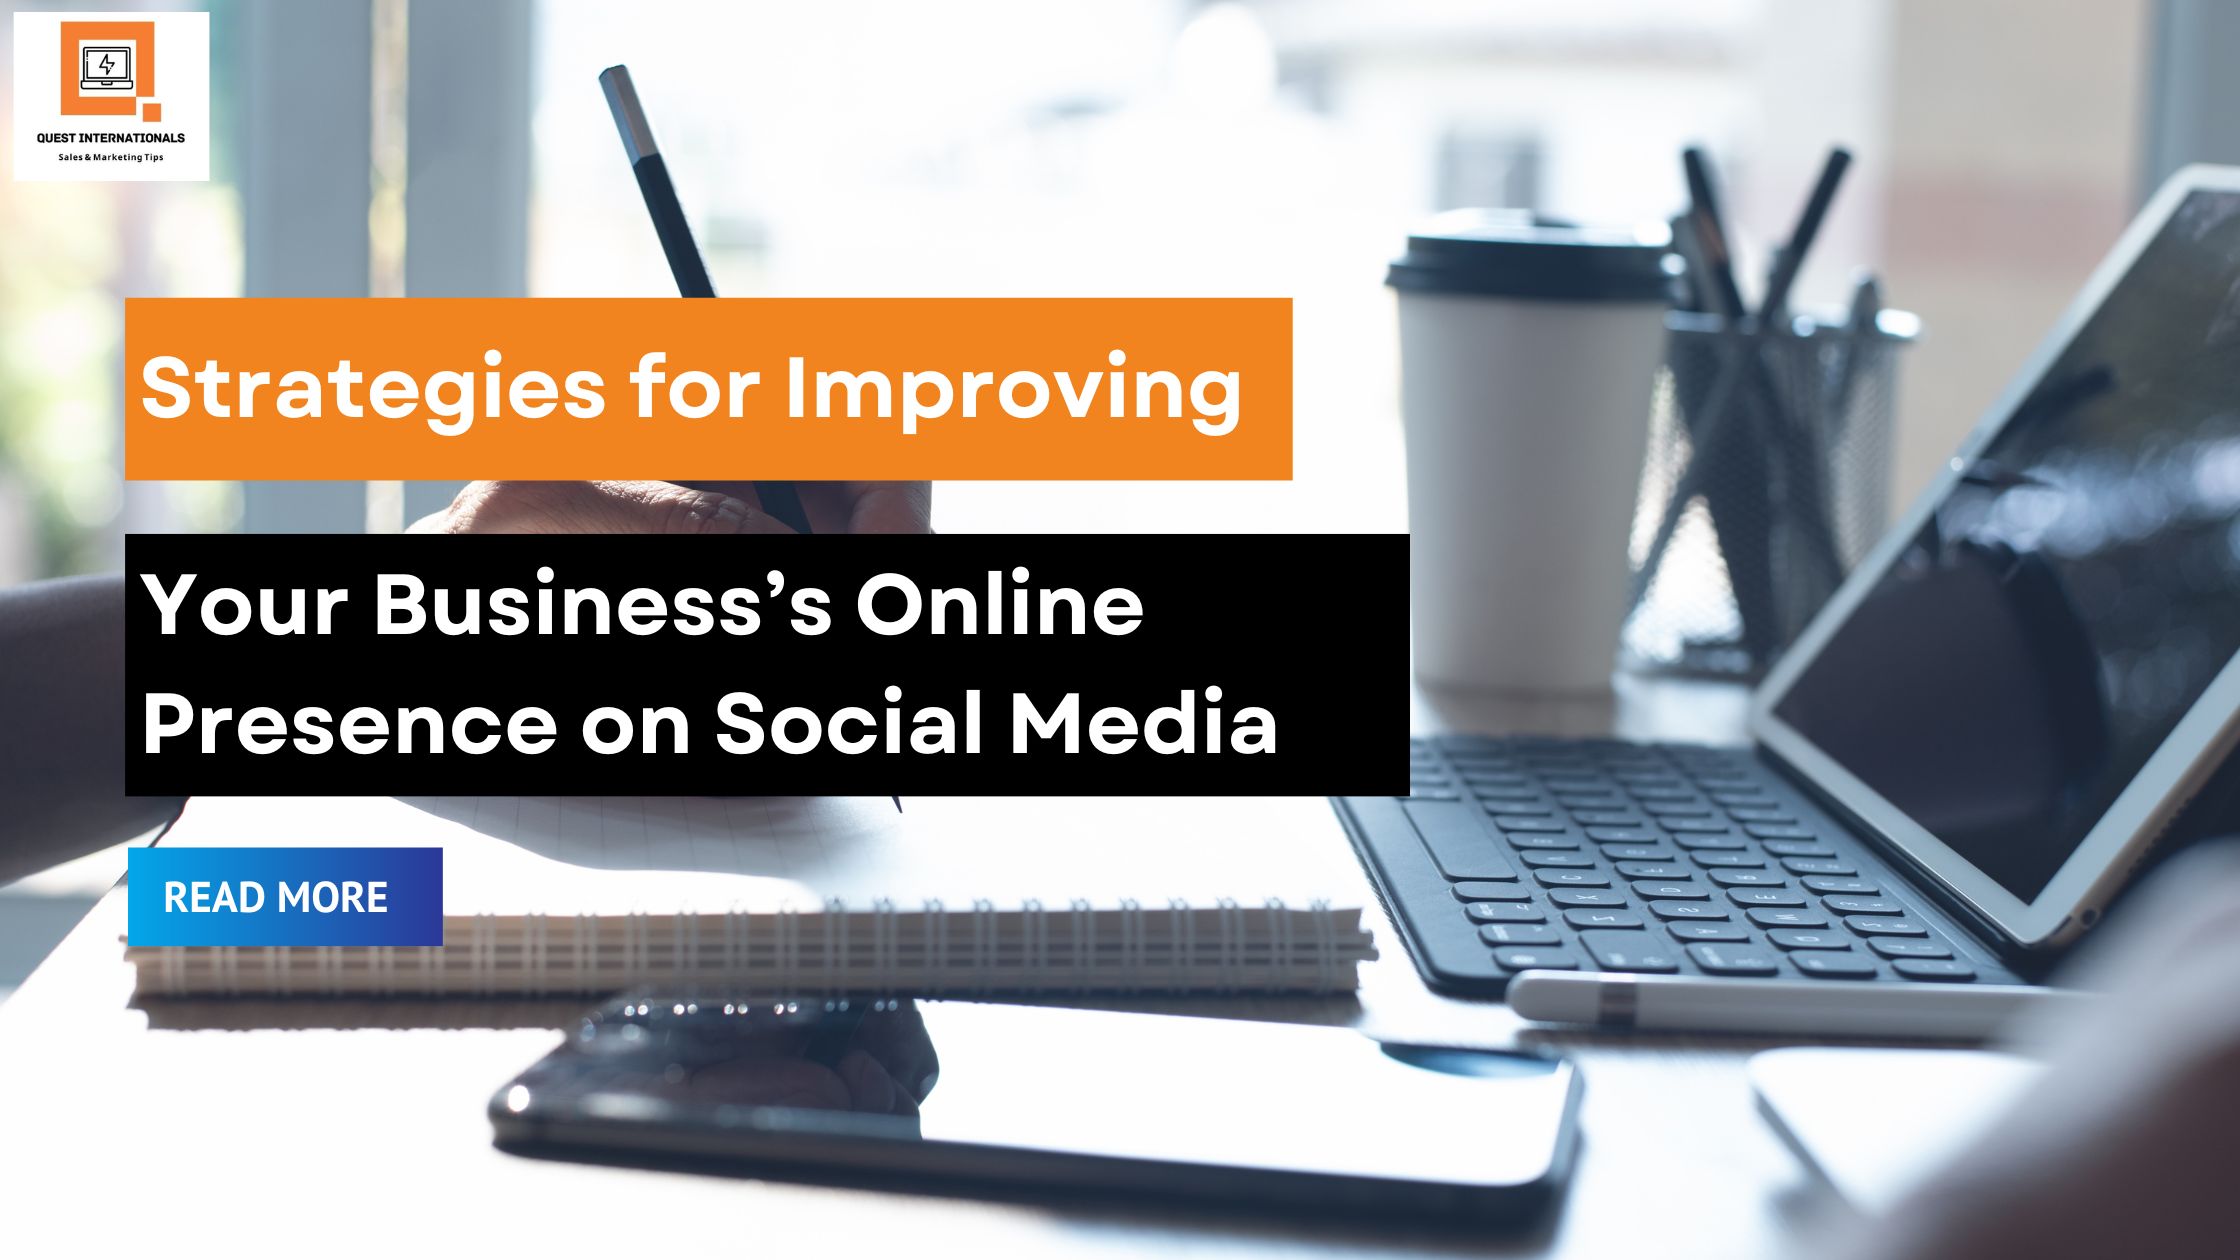 You are currently viewing Strategies for Improving Your Business’s Online Presence on Social Media